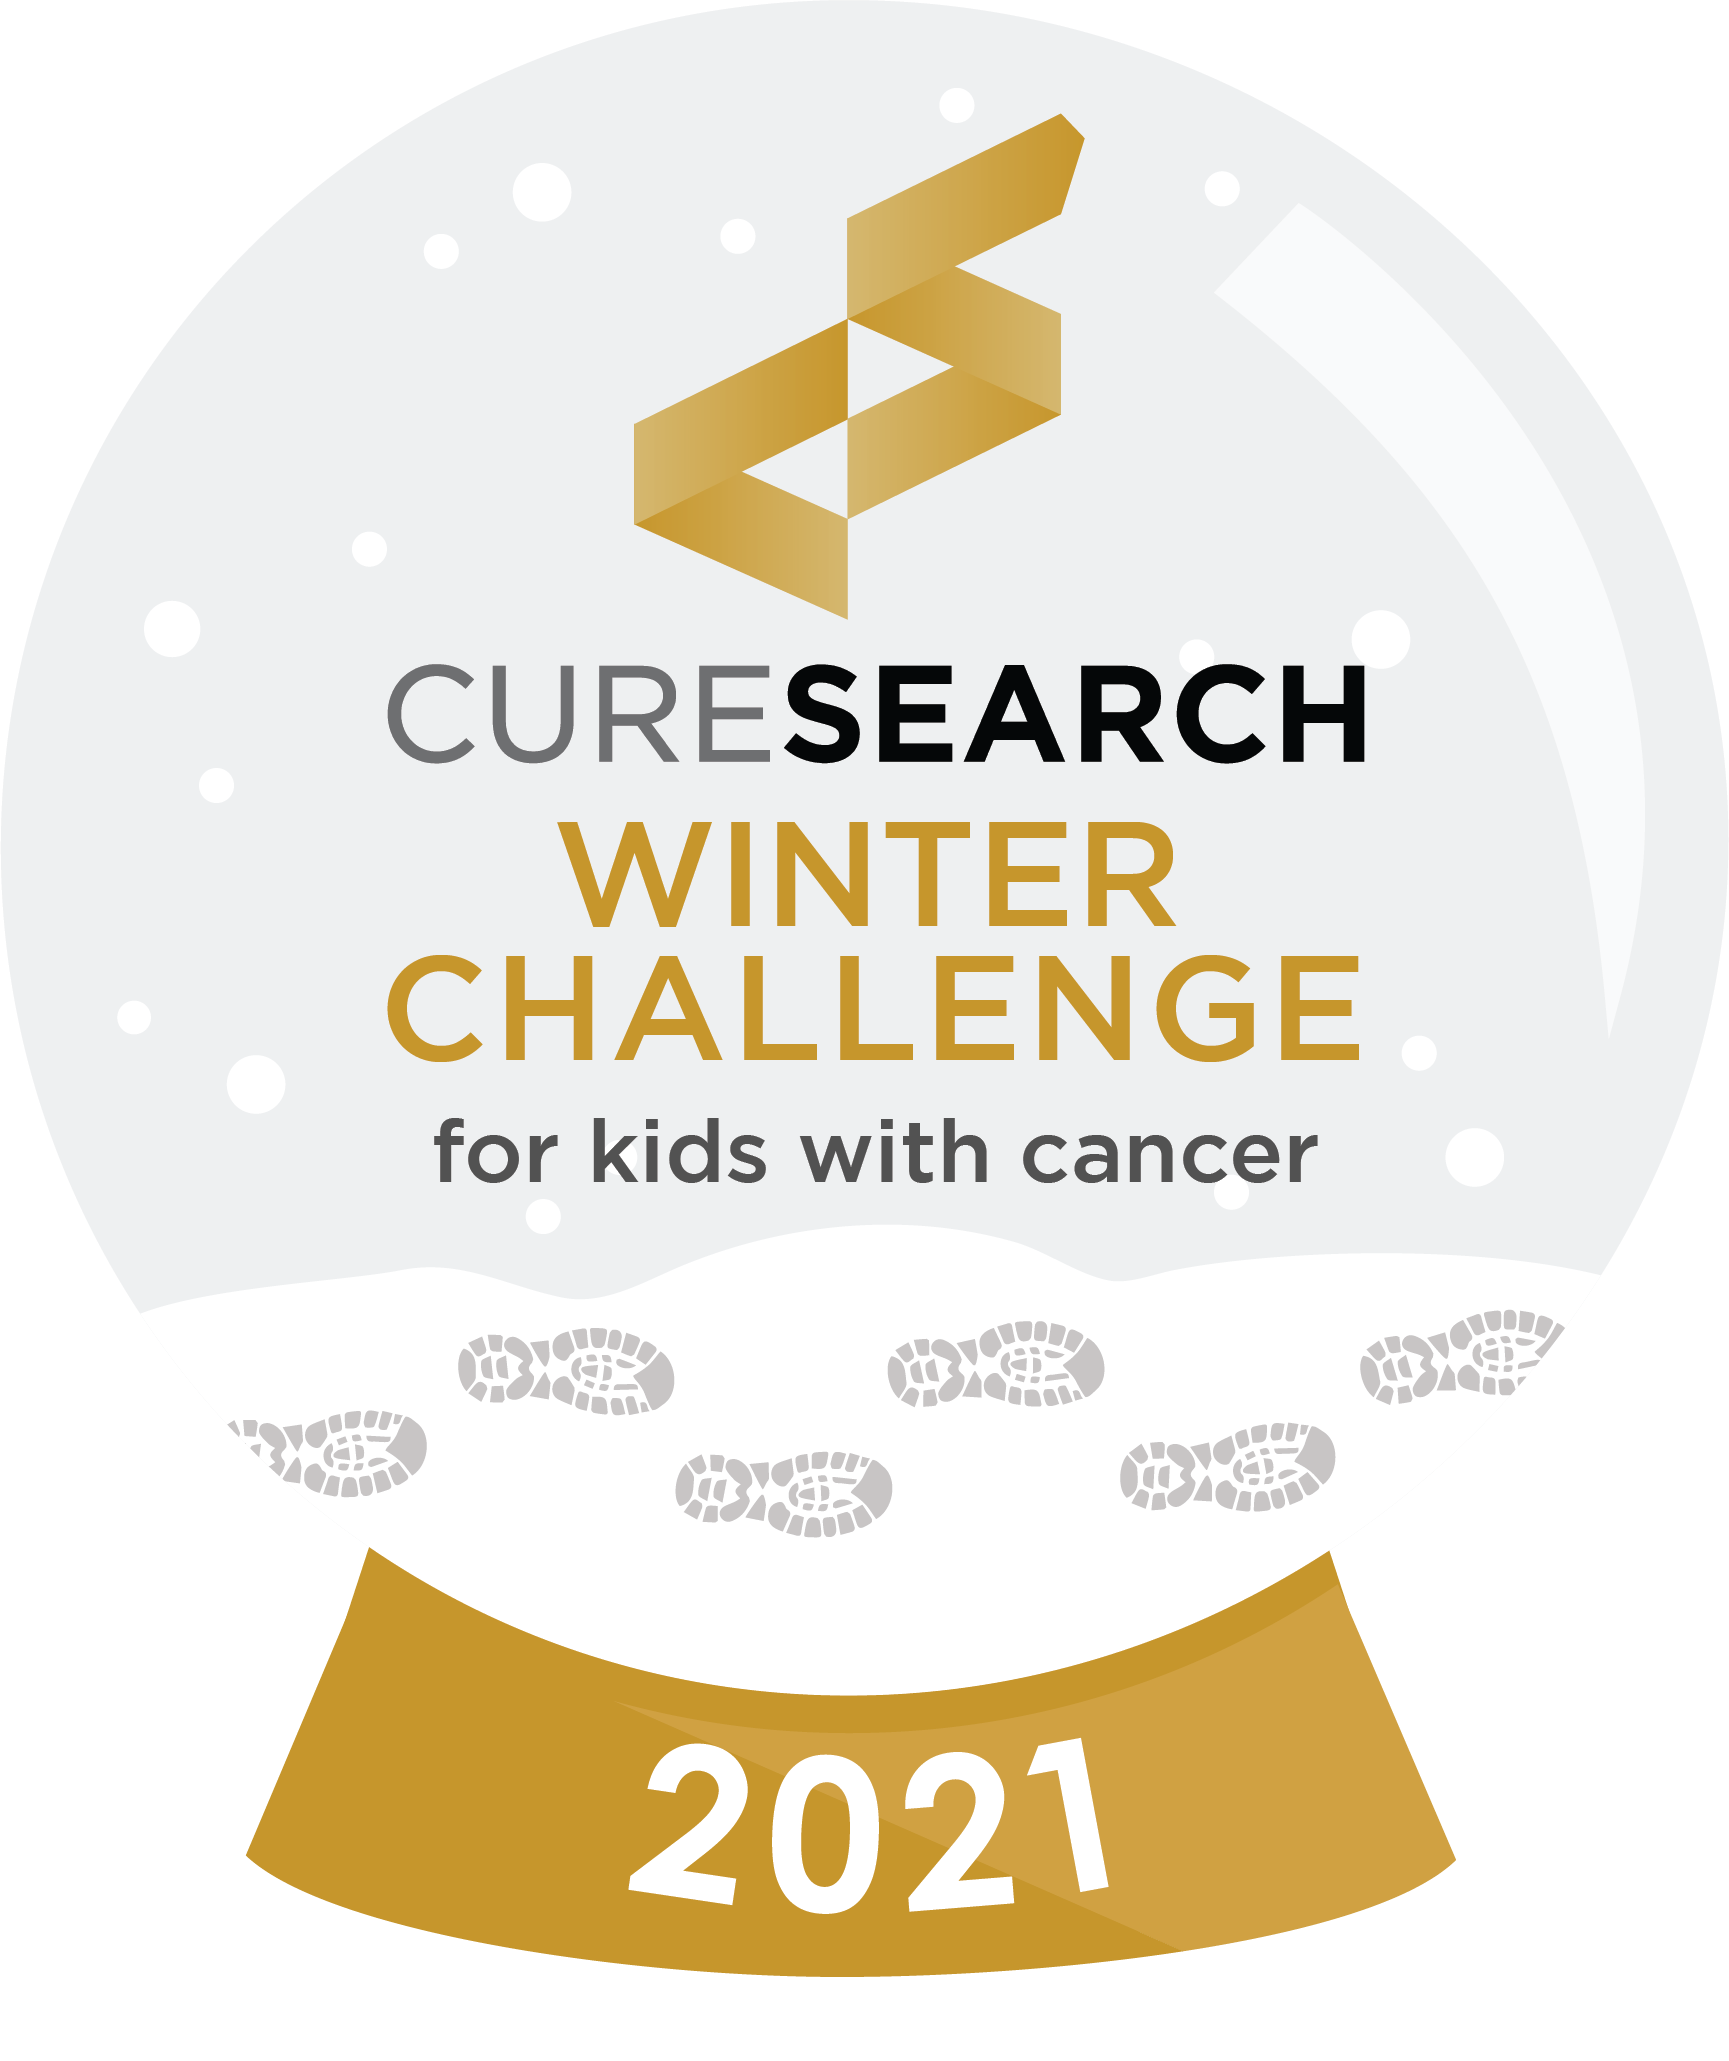 The CureSearch Winter Challenge for Kids w/ Cancer